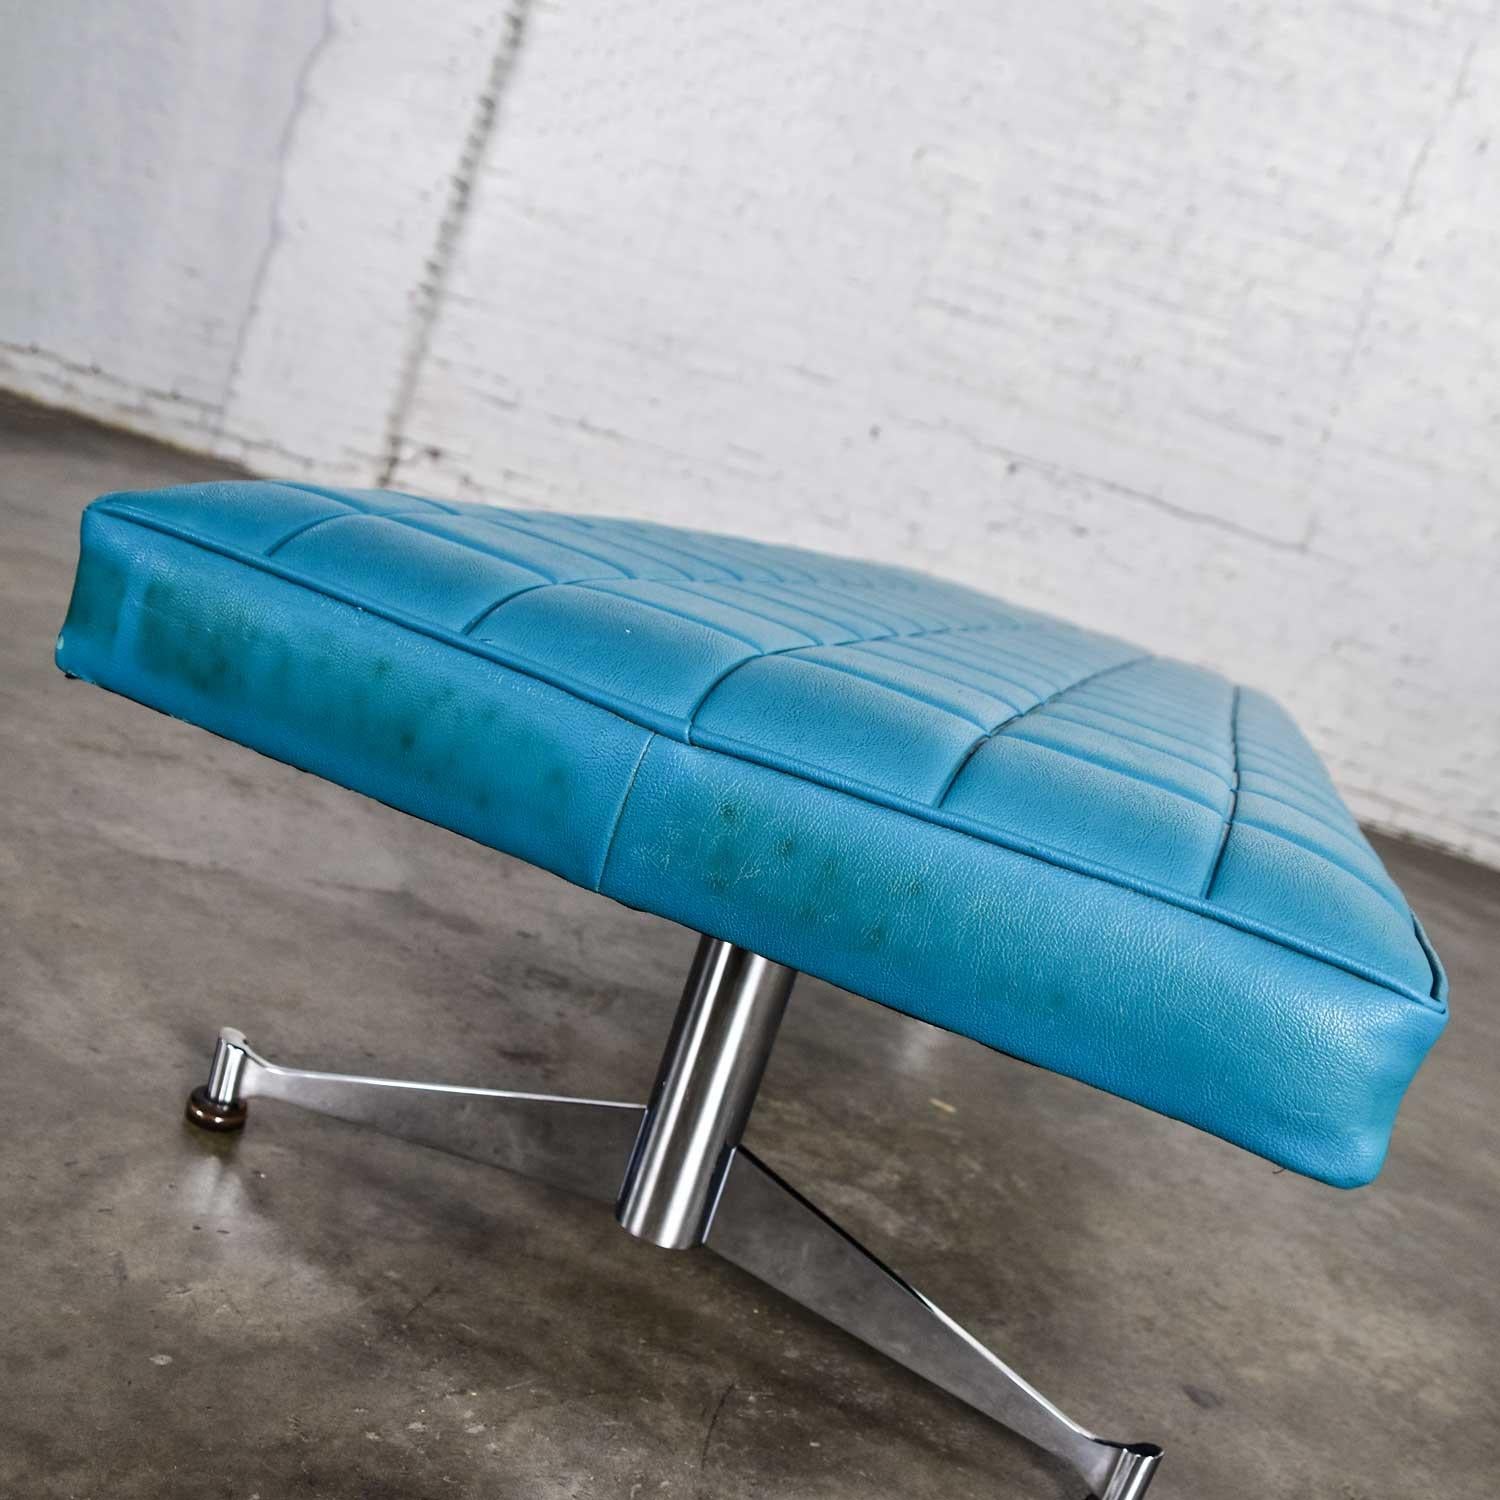 Madison Furn. Vinyl Faux Leather Turquoise Chrome Bench Daybed Style A. Umanoff For Sale 7